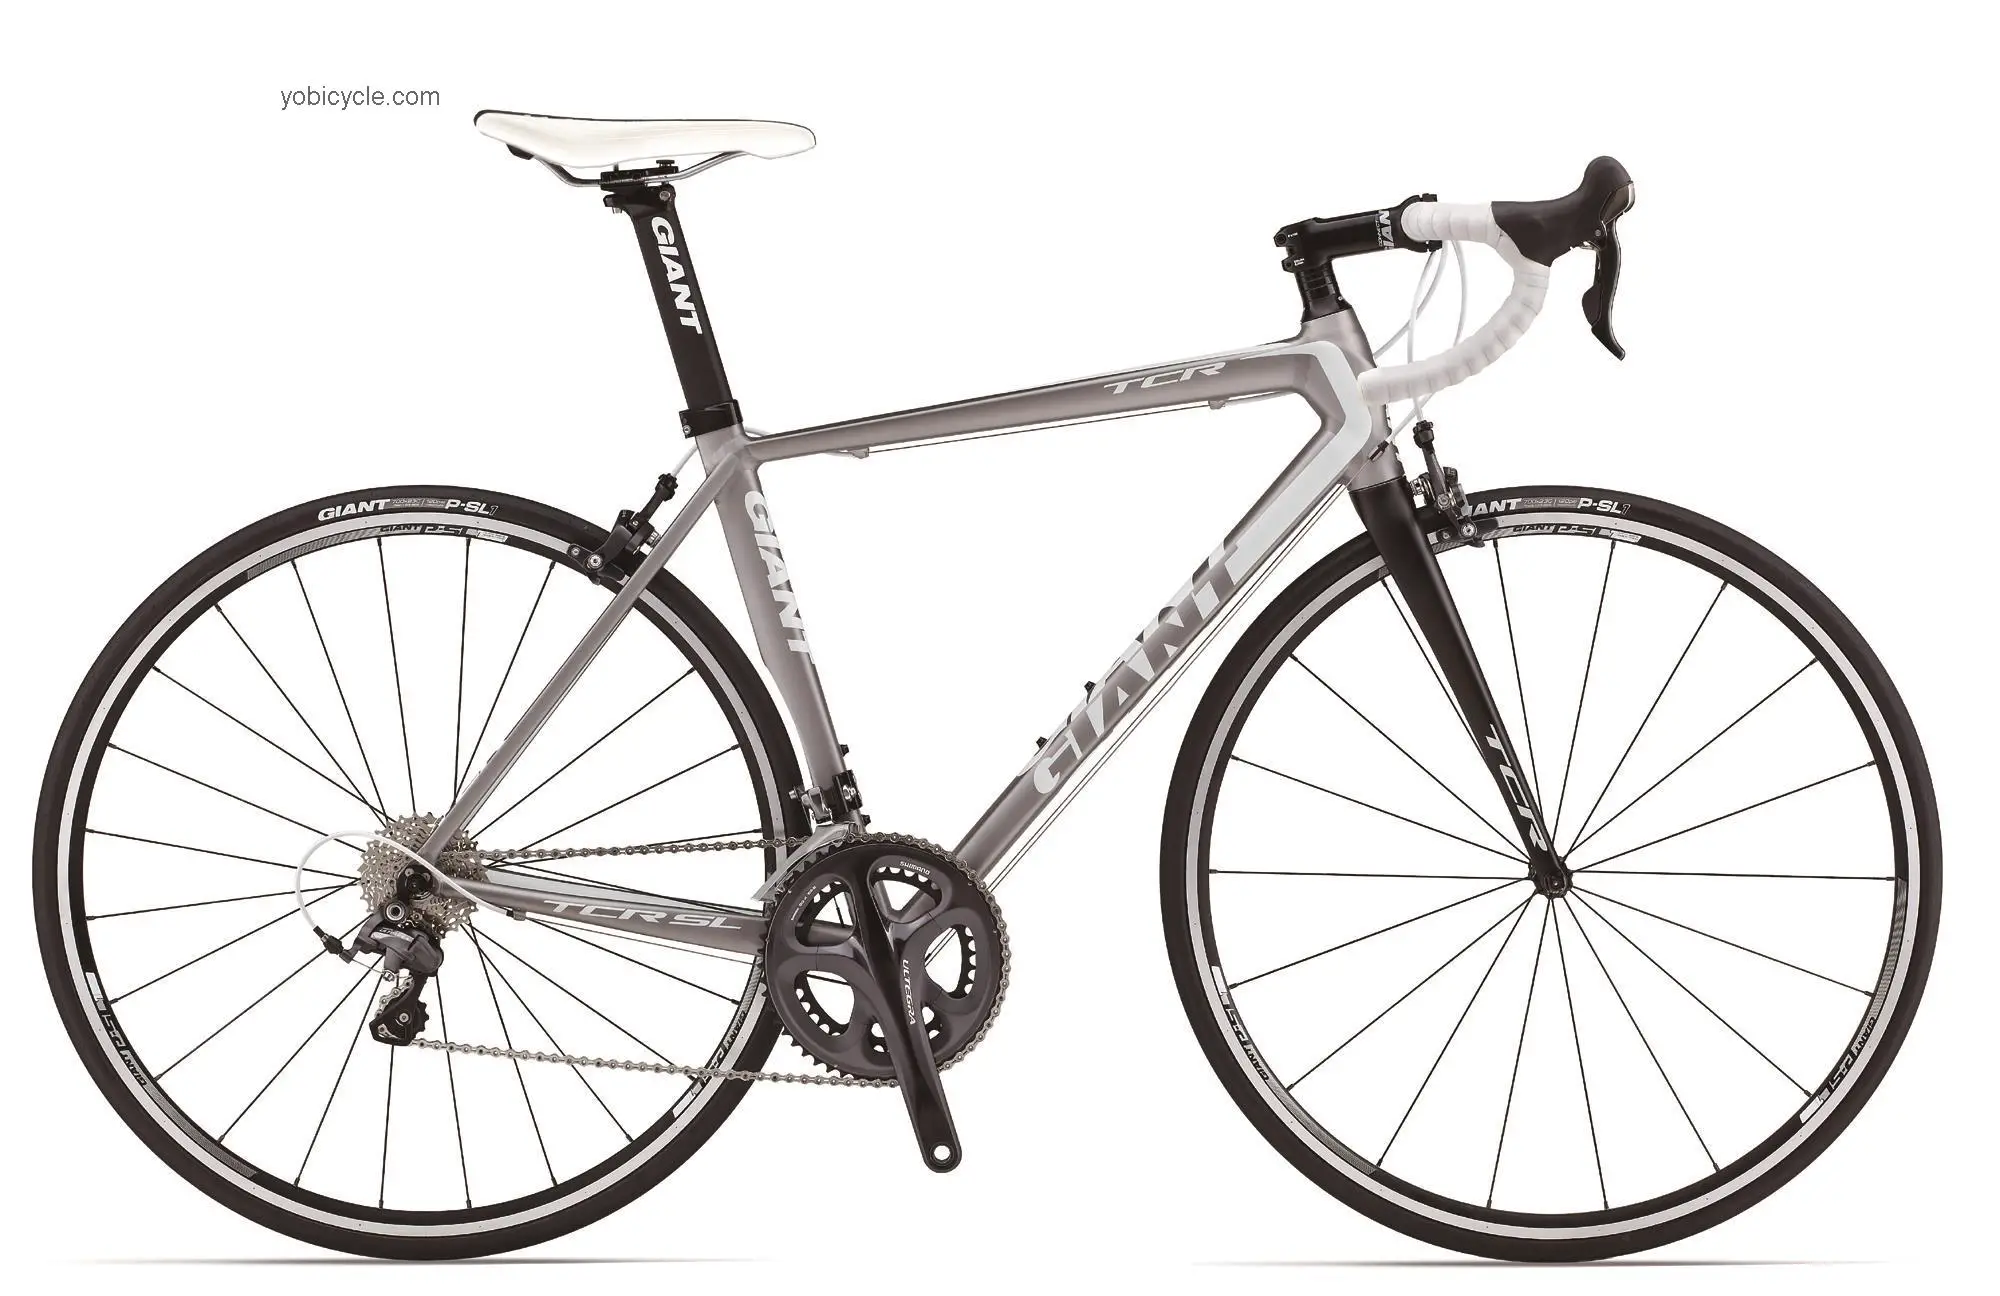 Giant TCR SL 1 2013 comparison online with competitors